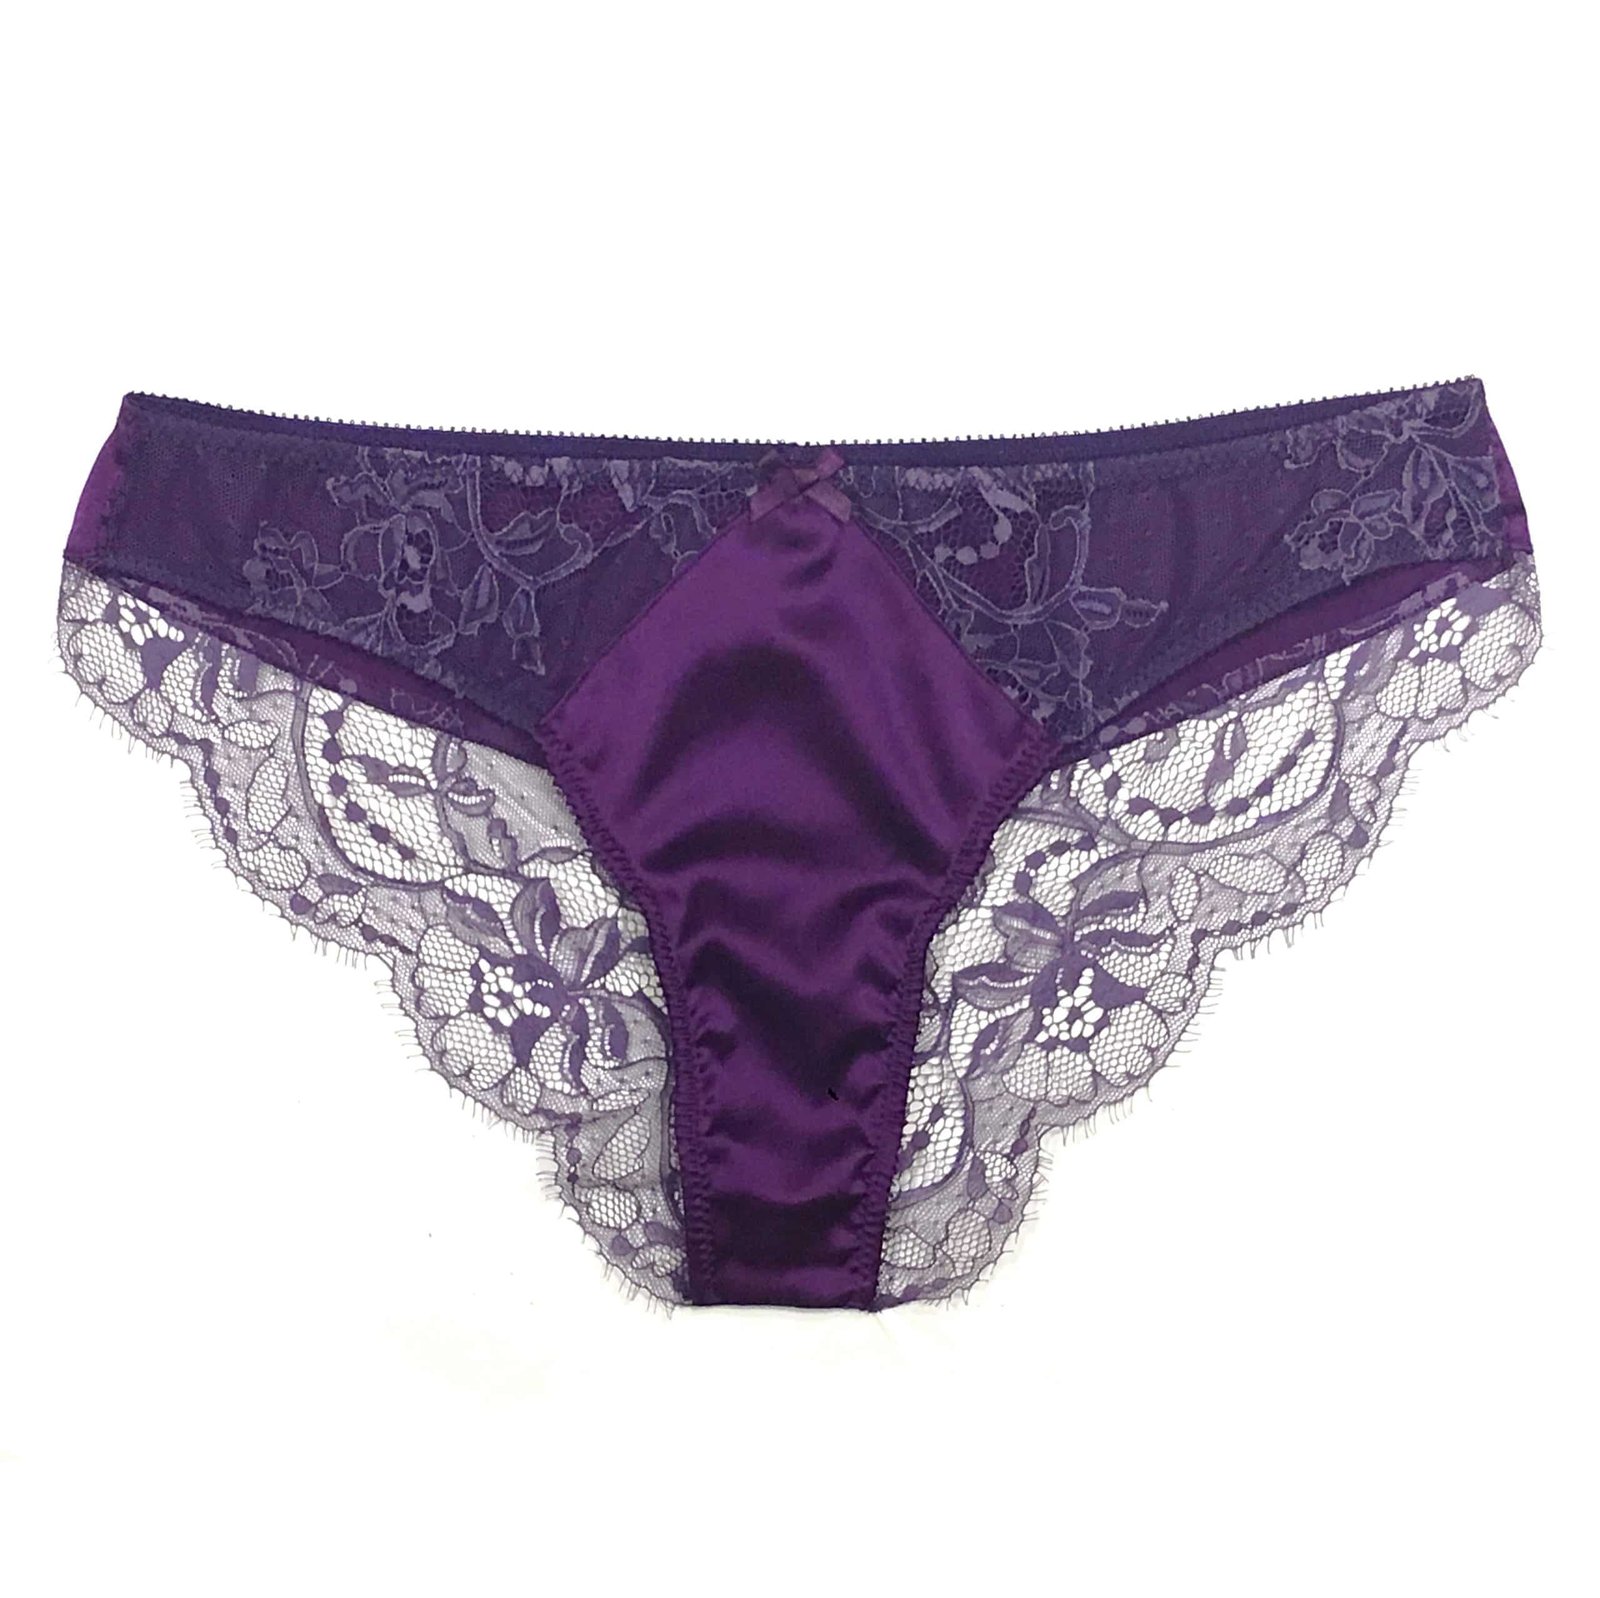 Purple Lace panties - handmade lingerie made in France